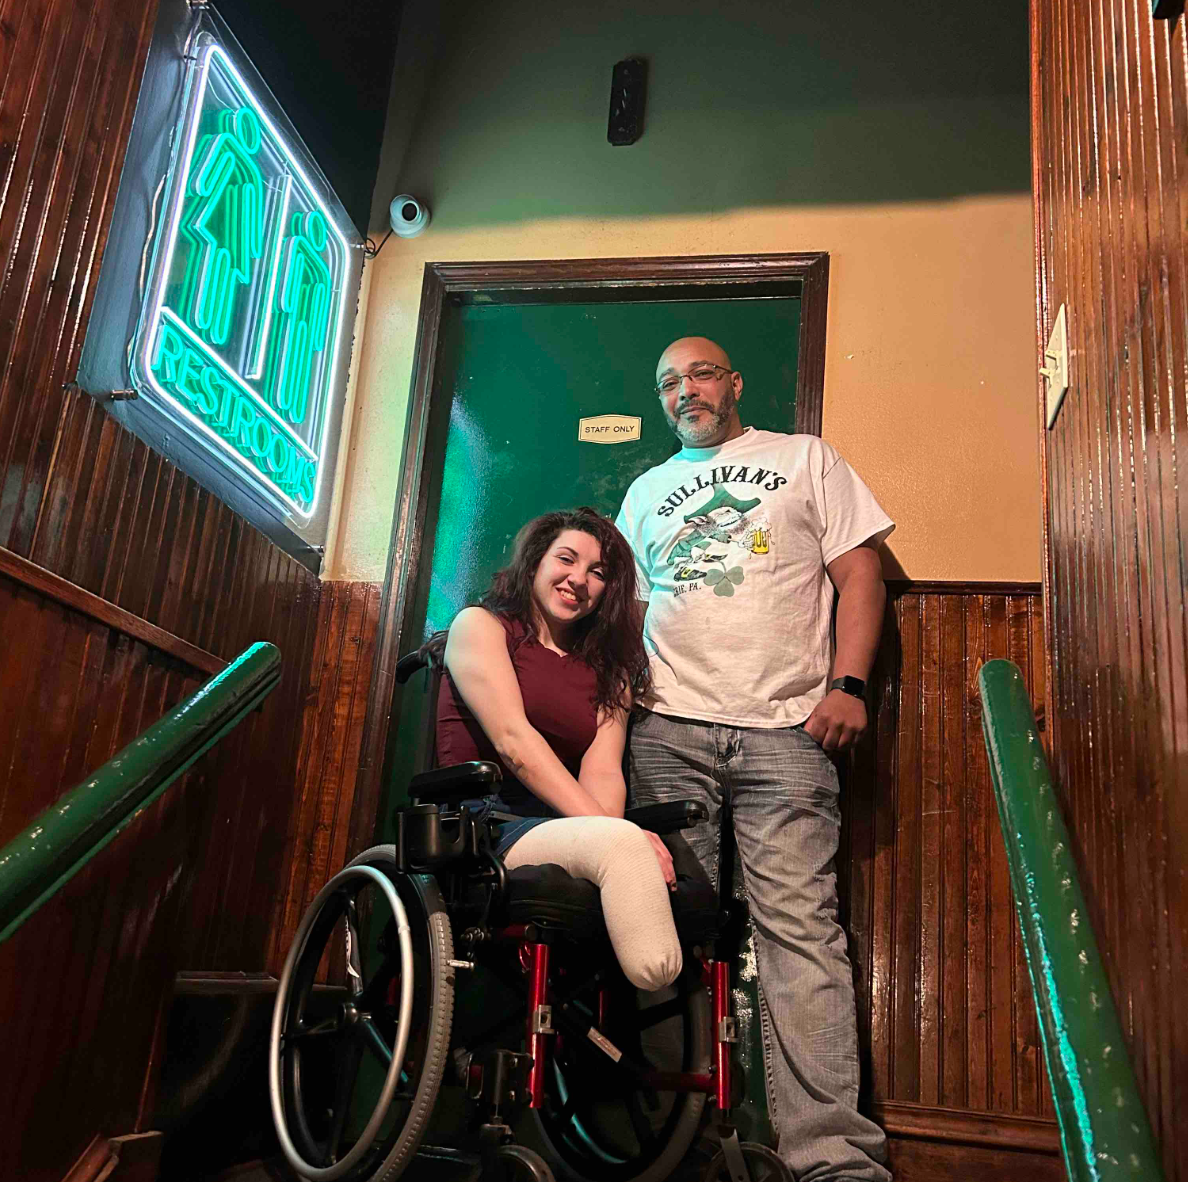 According to a GoFundMe page created to cover repair costs, Sydney Benes — the woman whose wheelchair was damaged — needs the chair to move around while she learns to use her prosthetics